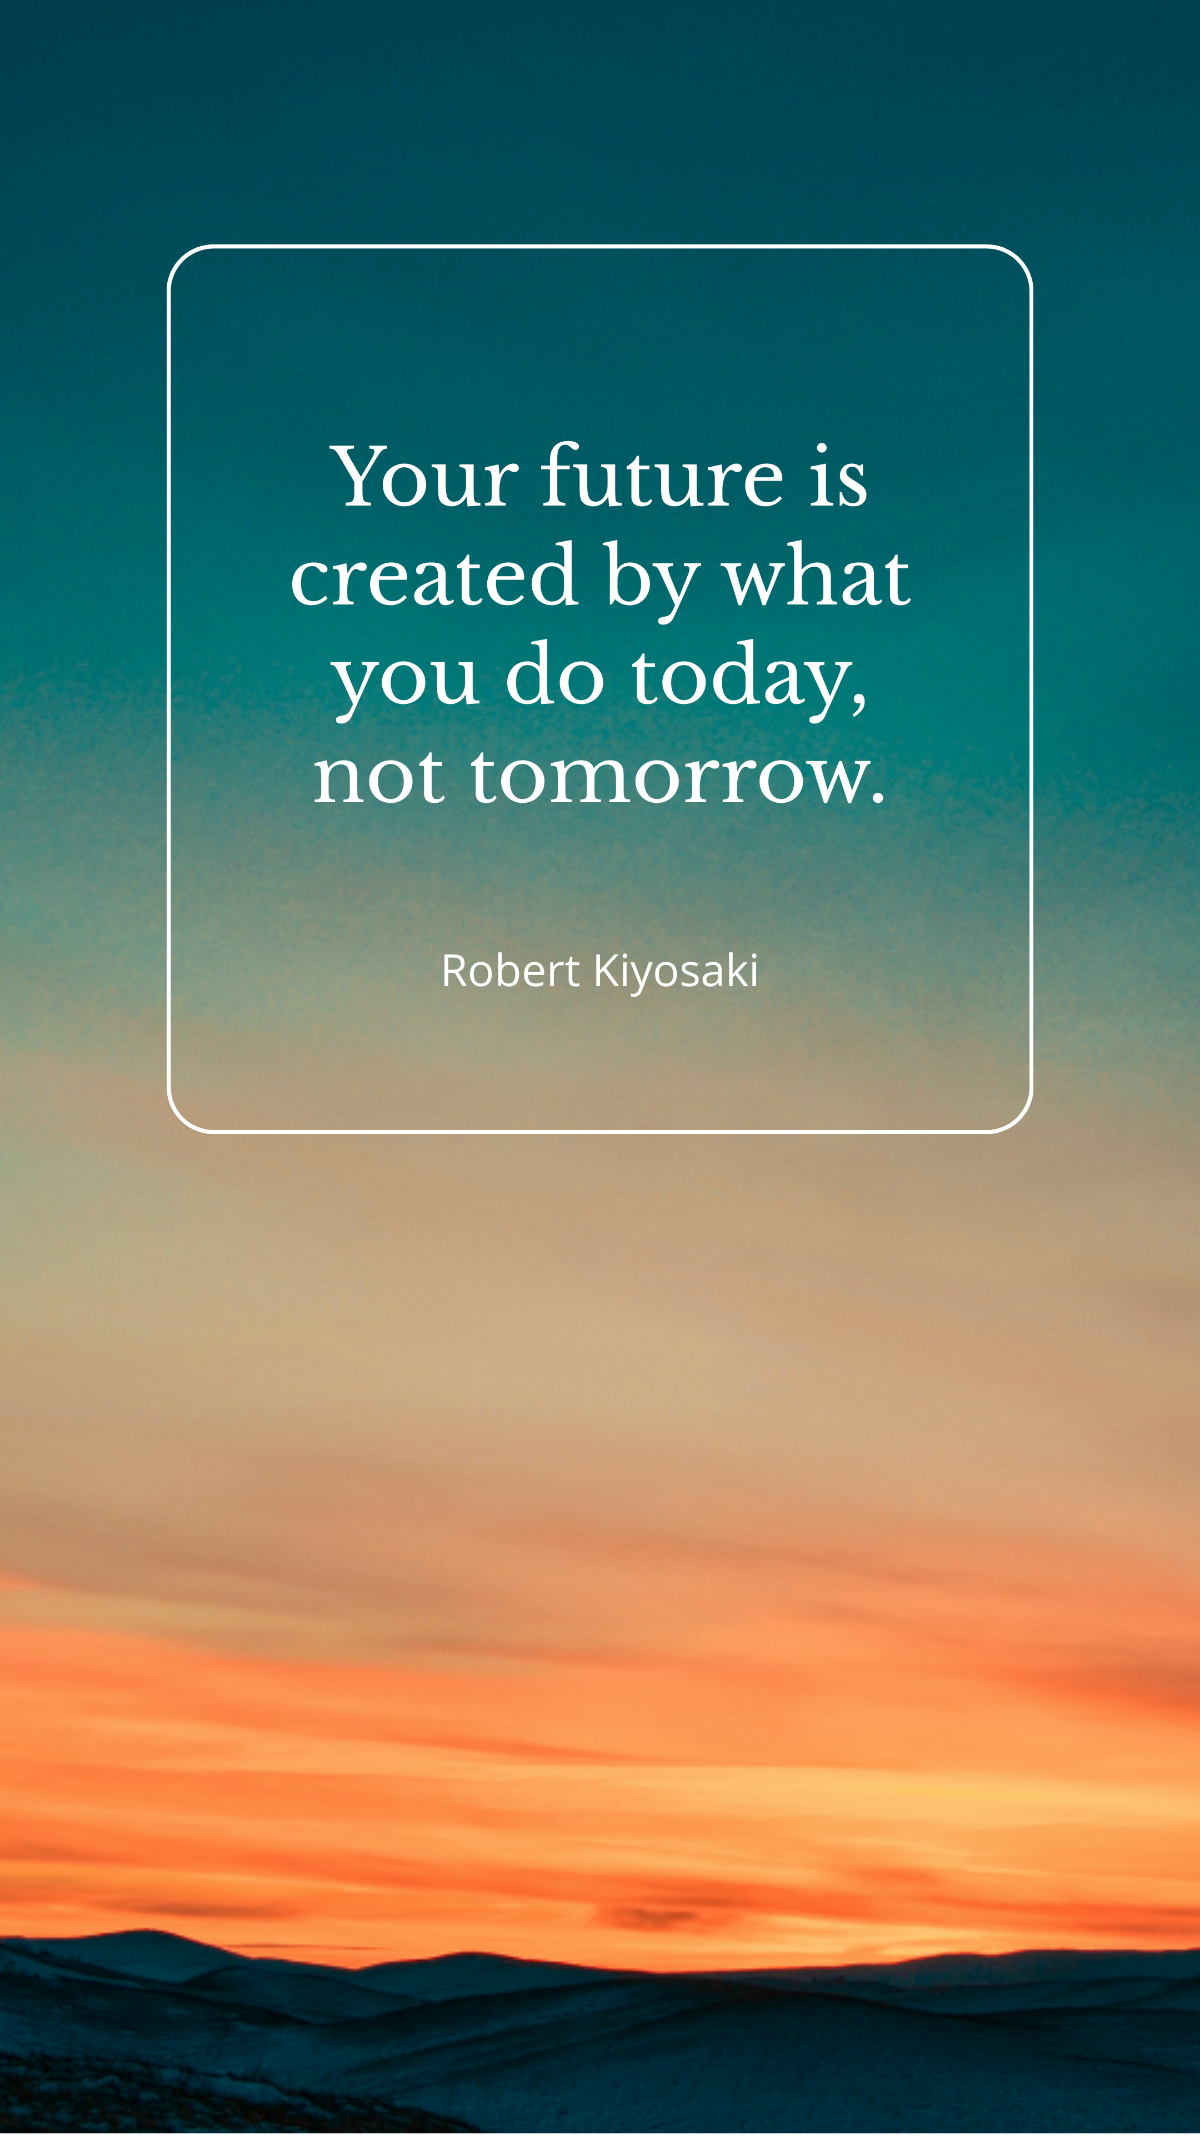 Robert Kiyosaki - Your future is created by what you do today, not tomorrow. Template